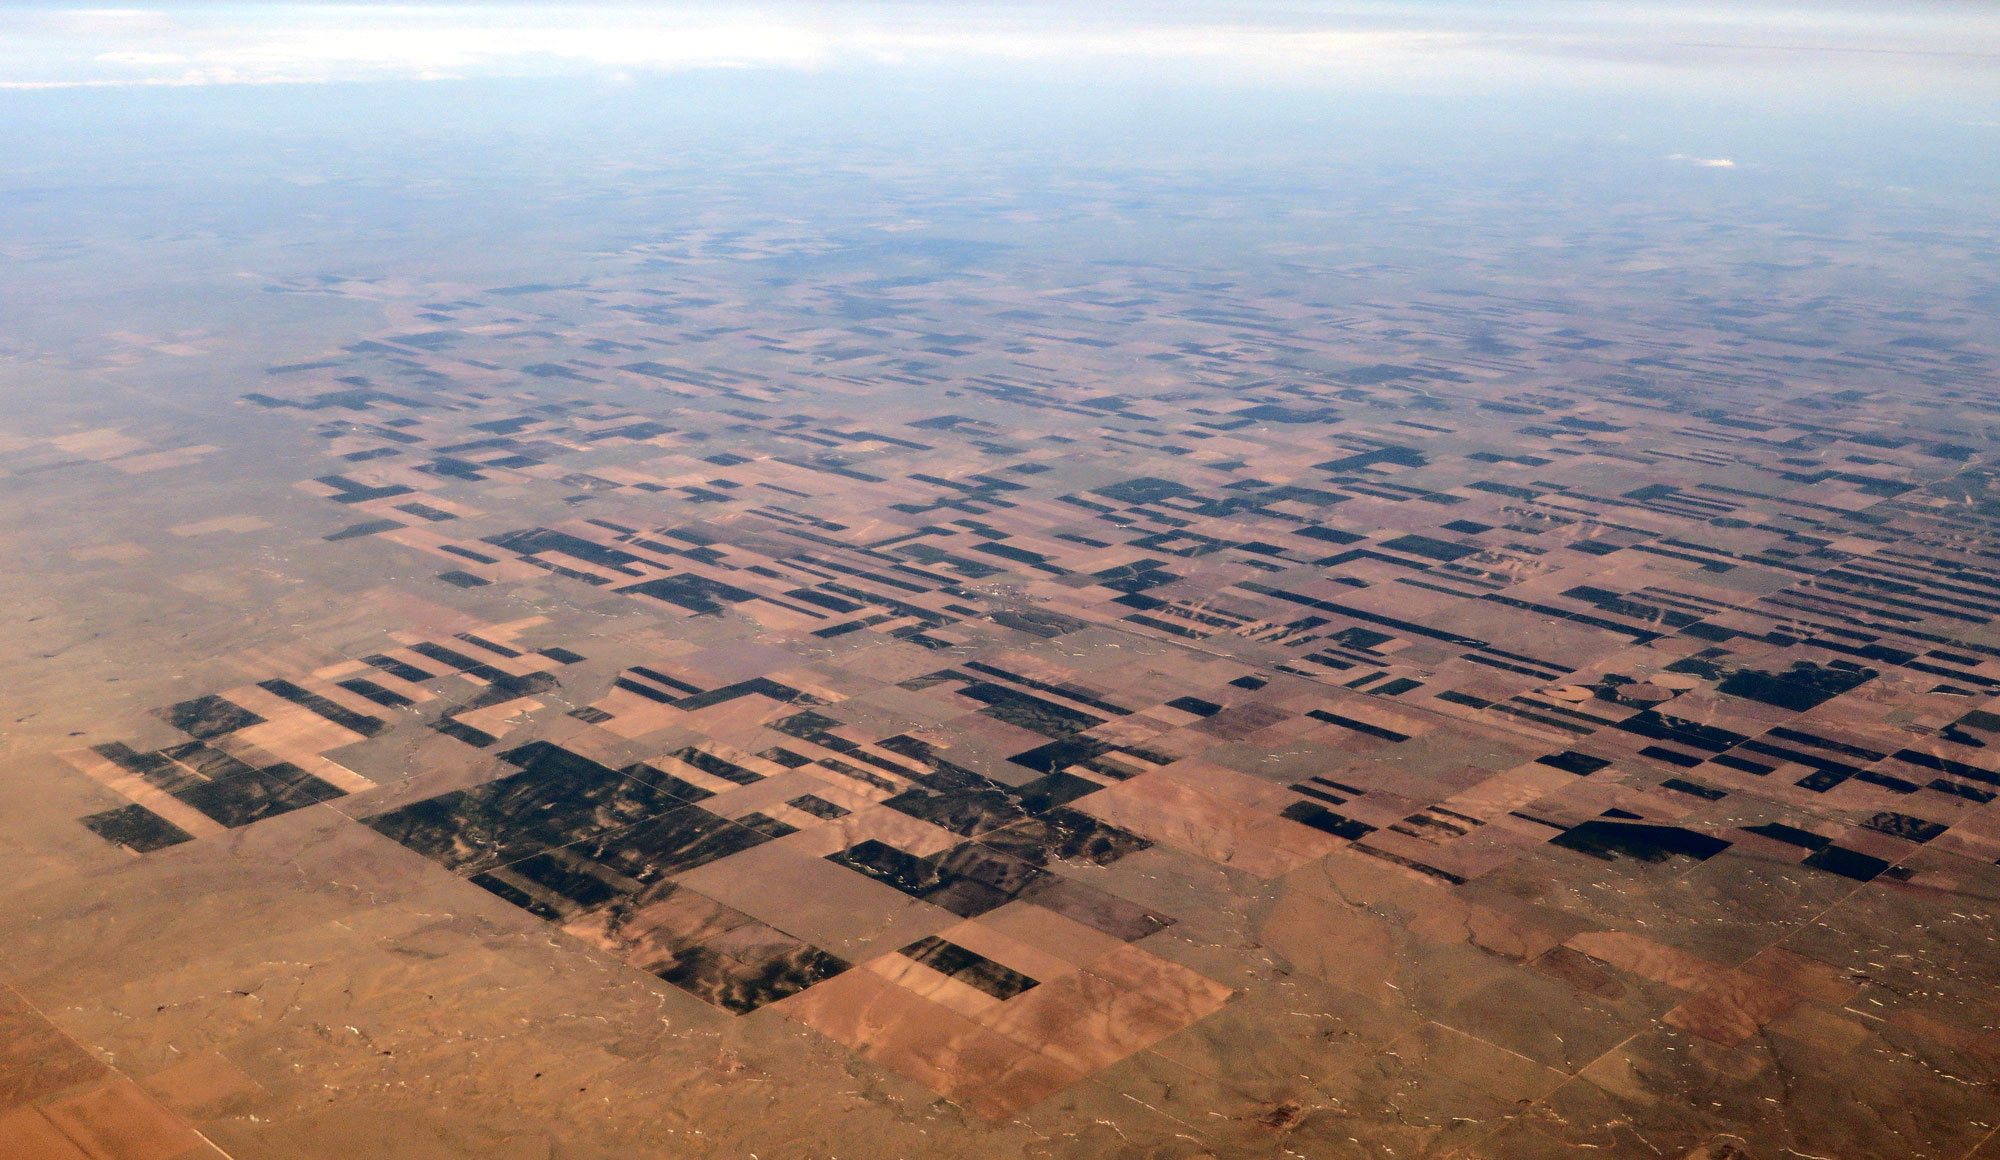 Aerial photograph of the region around Arriba, Colorado, in the Great Plains of the United States. The photo shows a relatively flat landscape, most of which has been divided into rectangular agricultural fields that are patches of yellow, brown, or dark green vegetation.